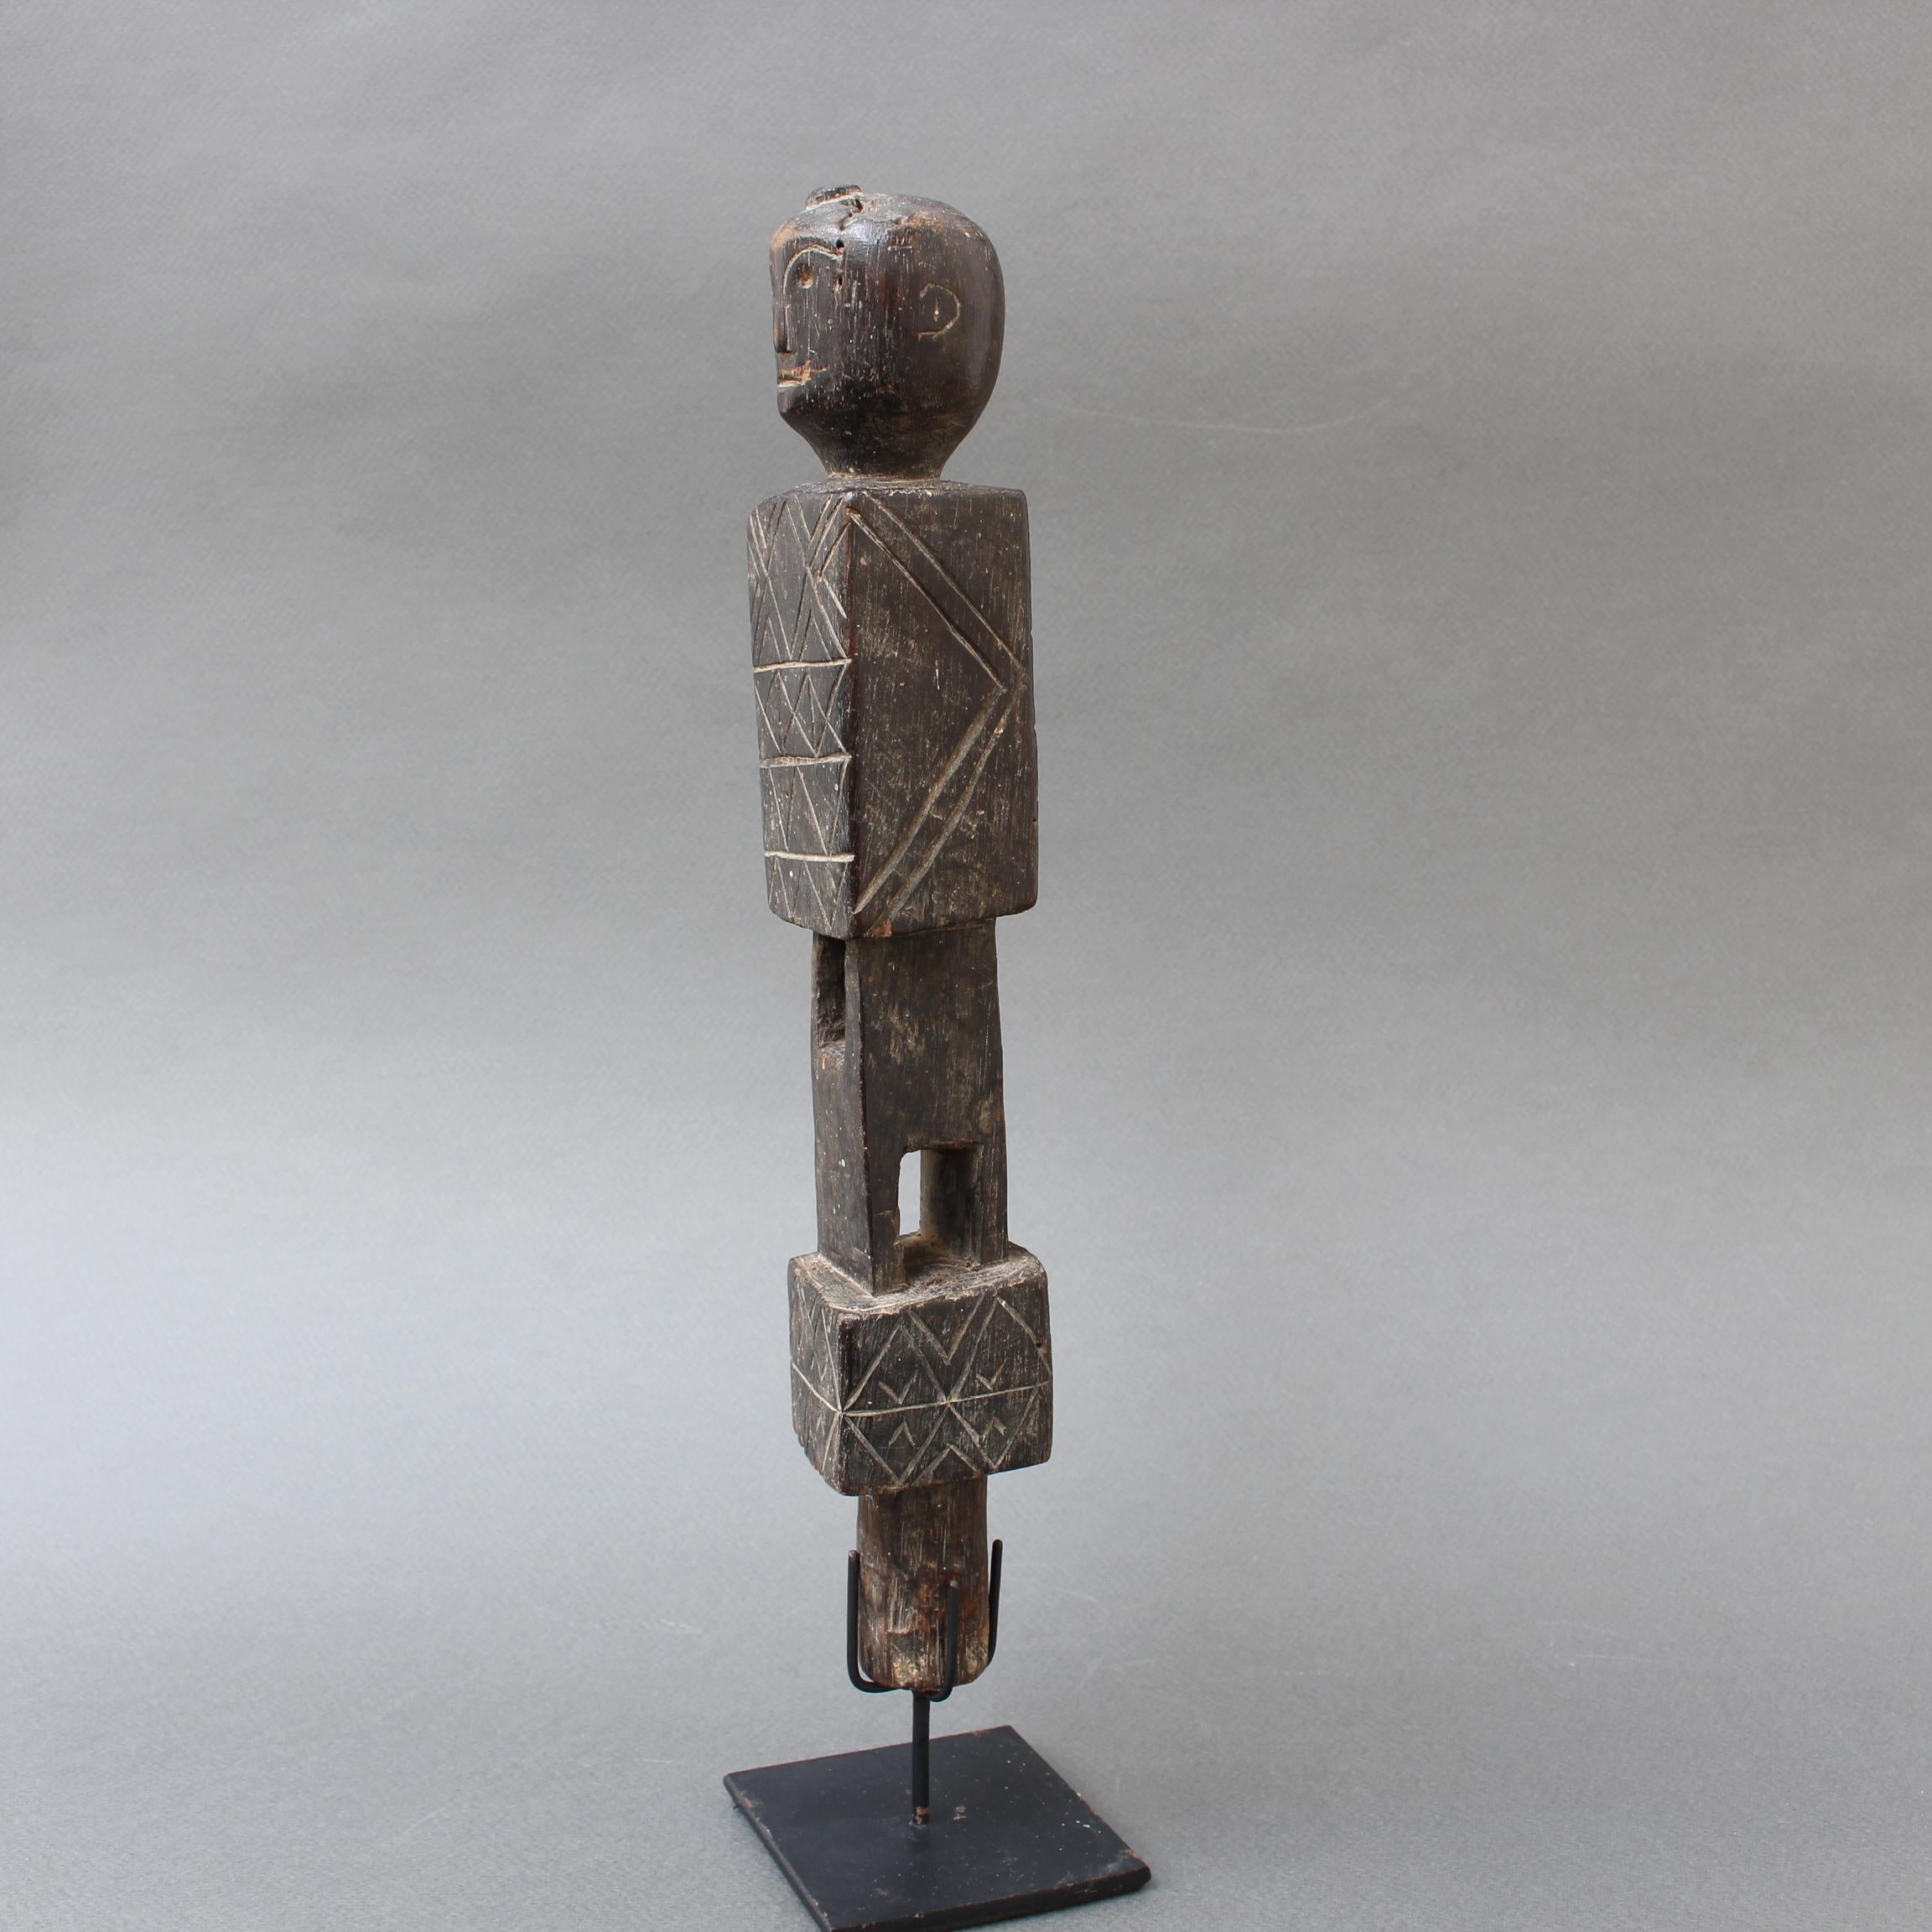 Carved wooden vise tool with human figure finial from Nias, Indonesia (circa 1960s-1970s). A striking carved piece with geometric patterns on the top and bottom of the figure. Rectangular voids are cut into the figure's length most likely so that it